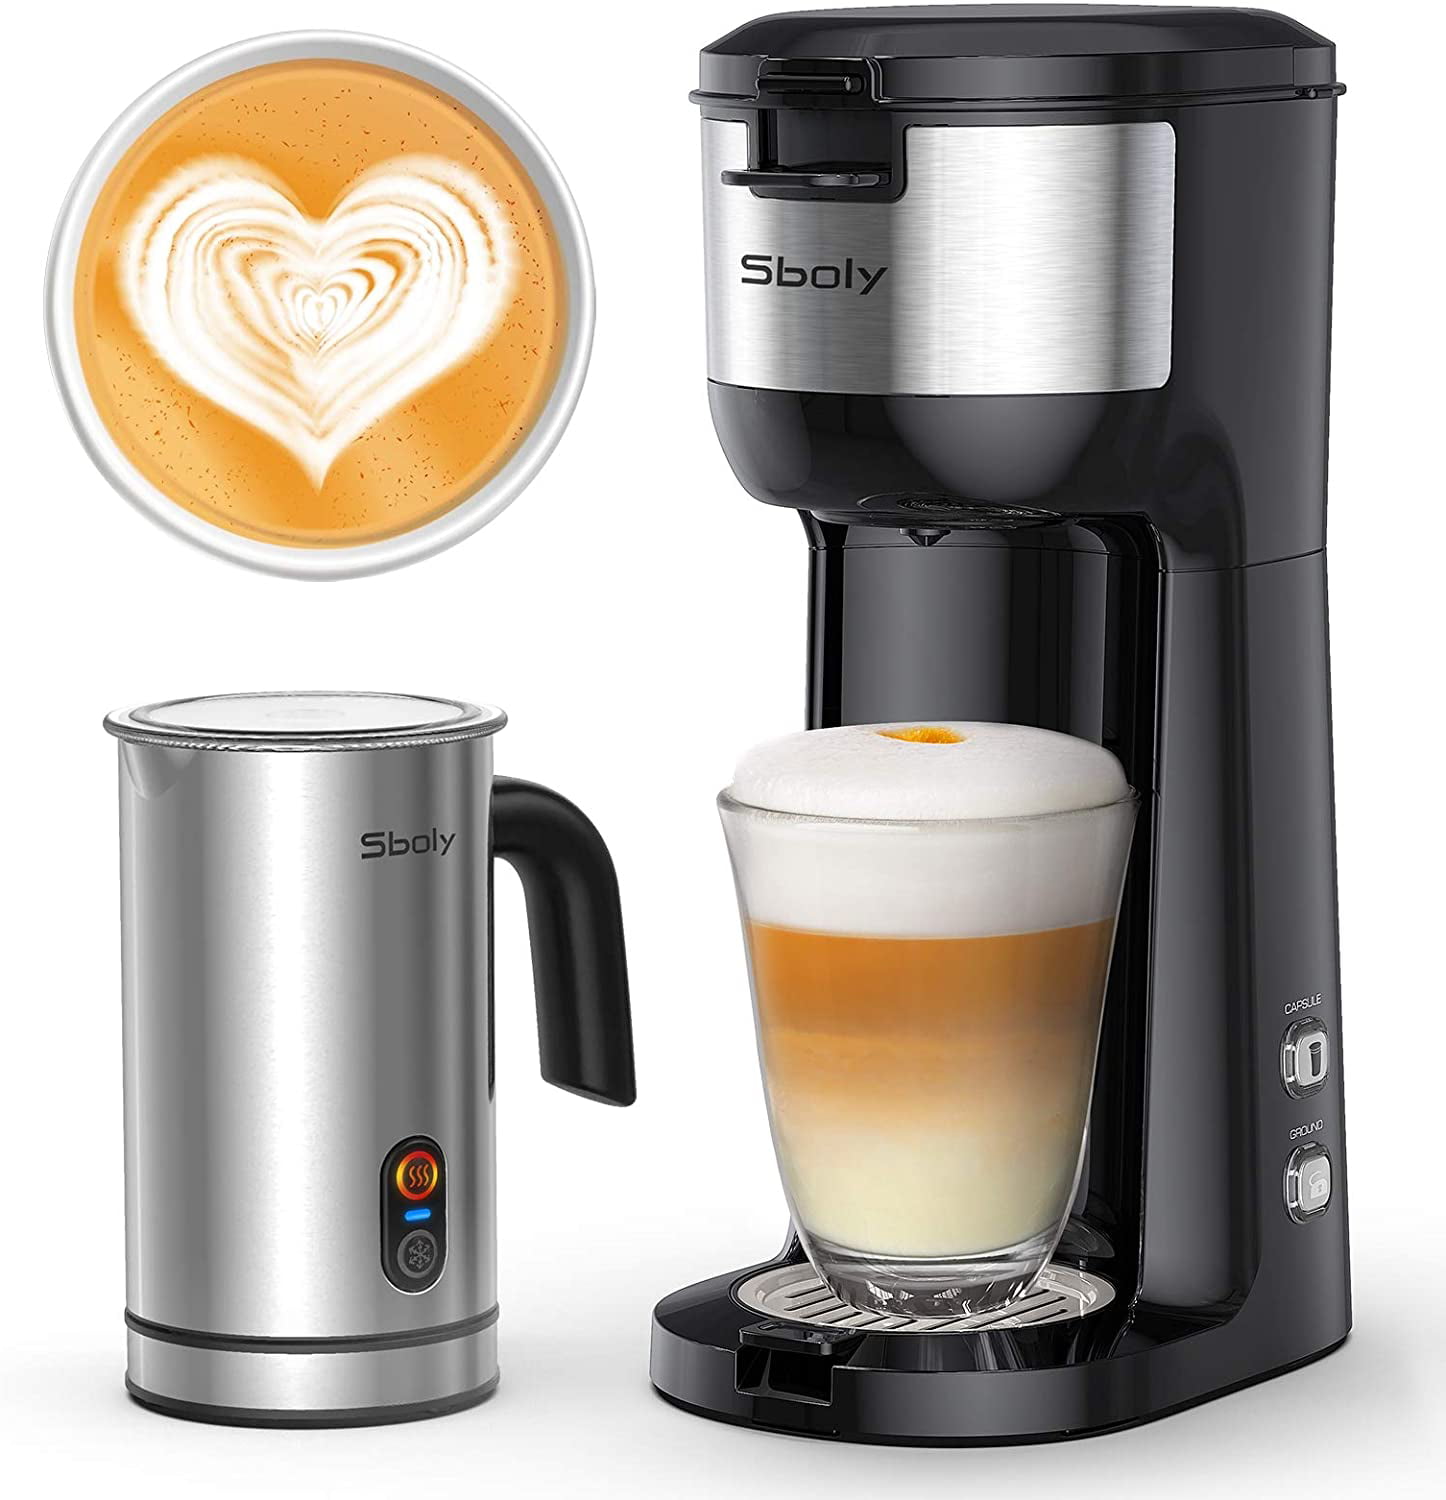 Sboly Single Serve Coffee Maker & Milk Frother, Coffee